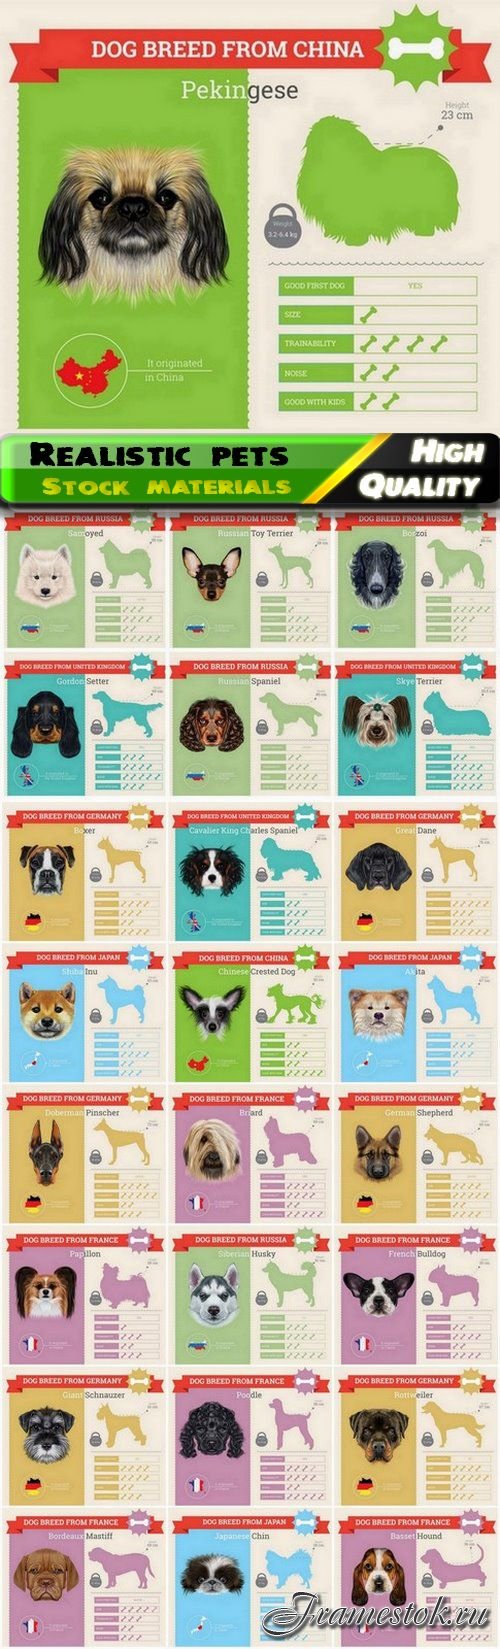 Realistic vector dog and pet illustration of different breeds 2 25 Eps